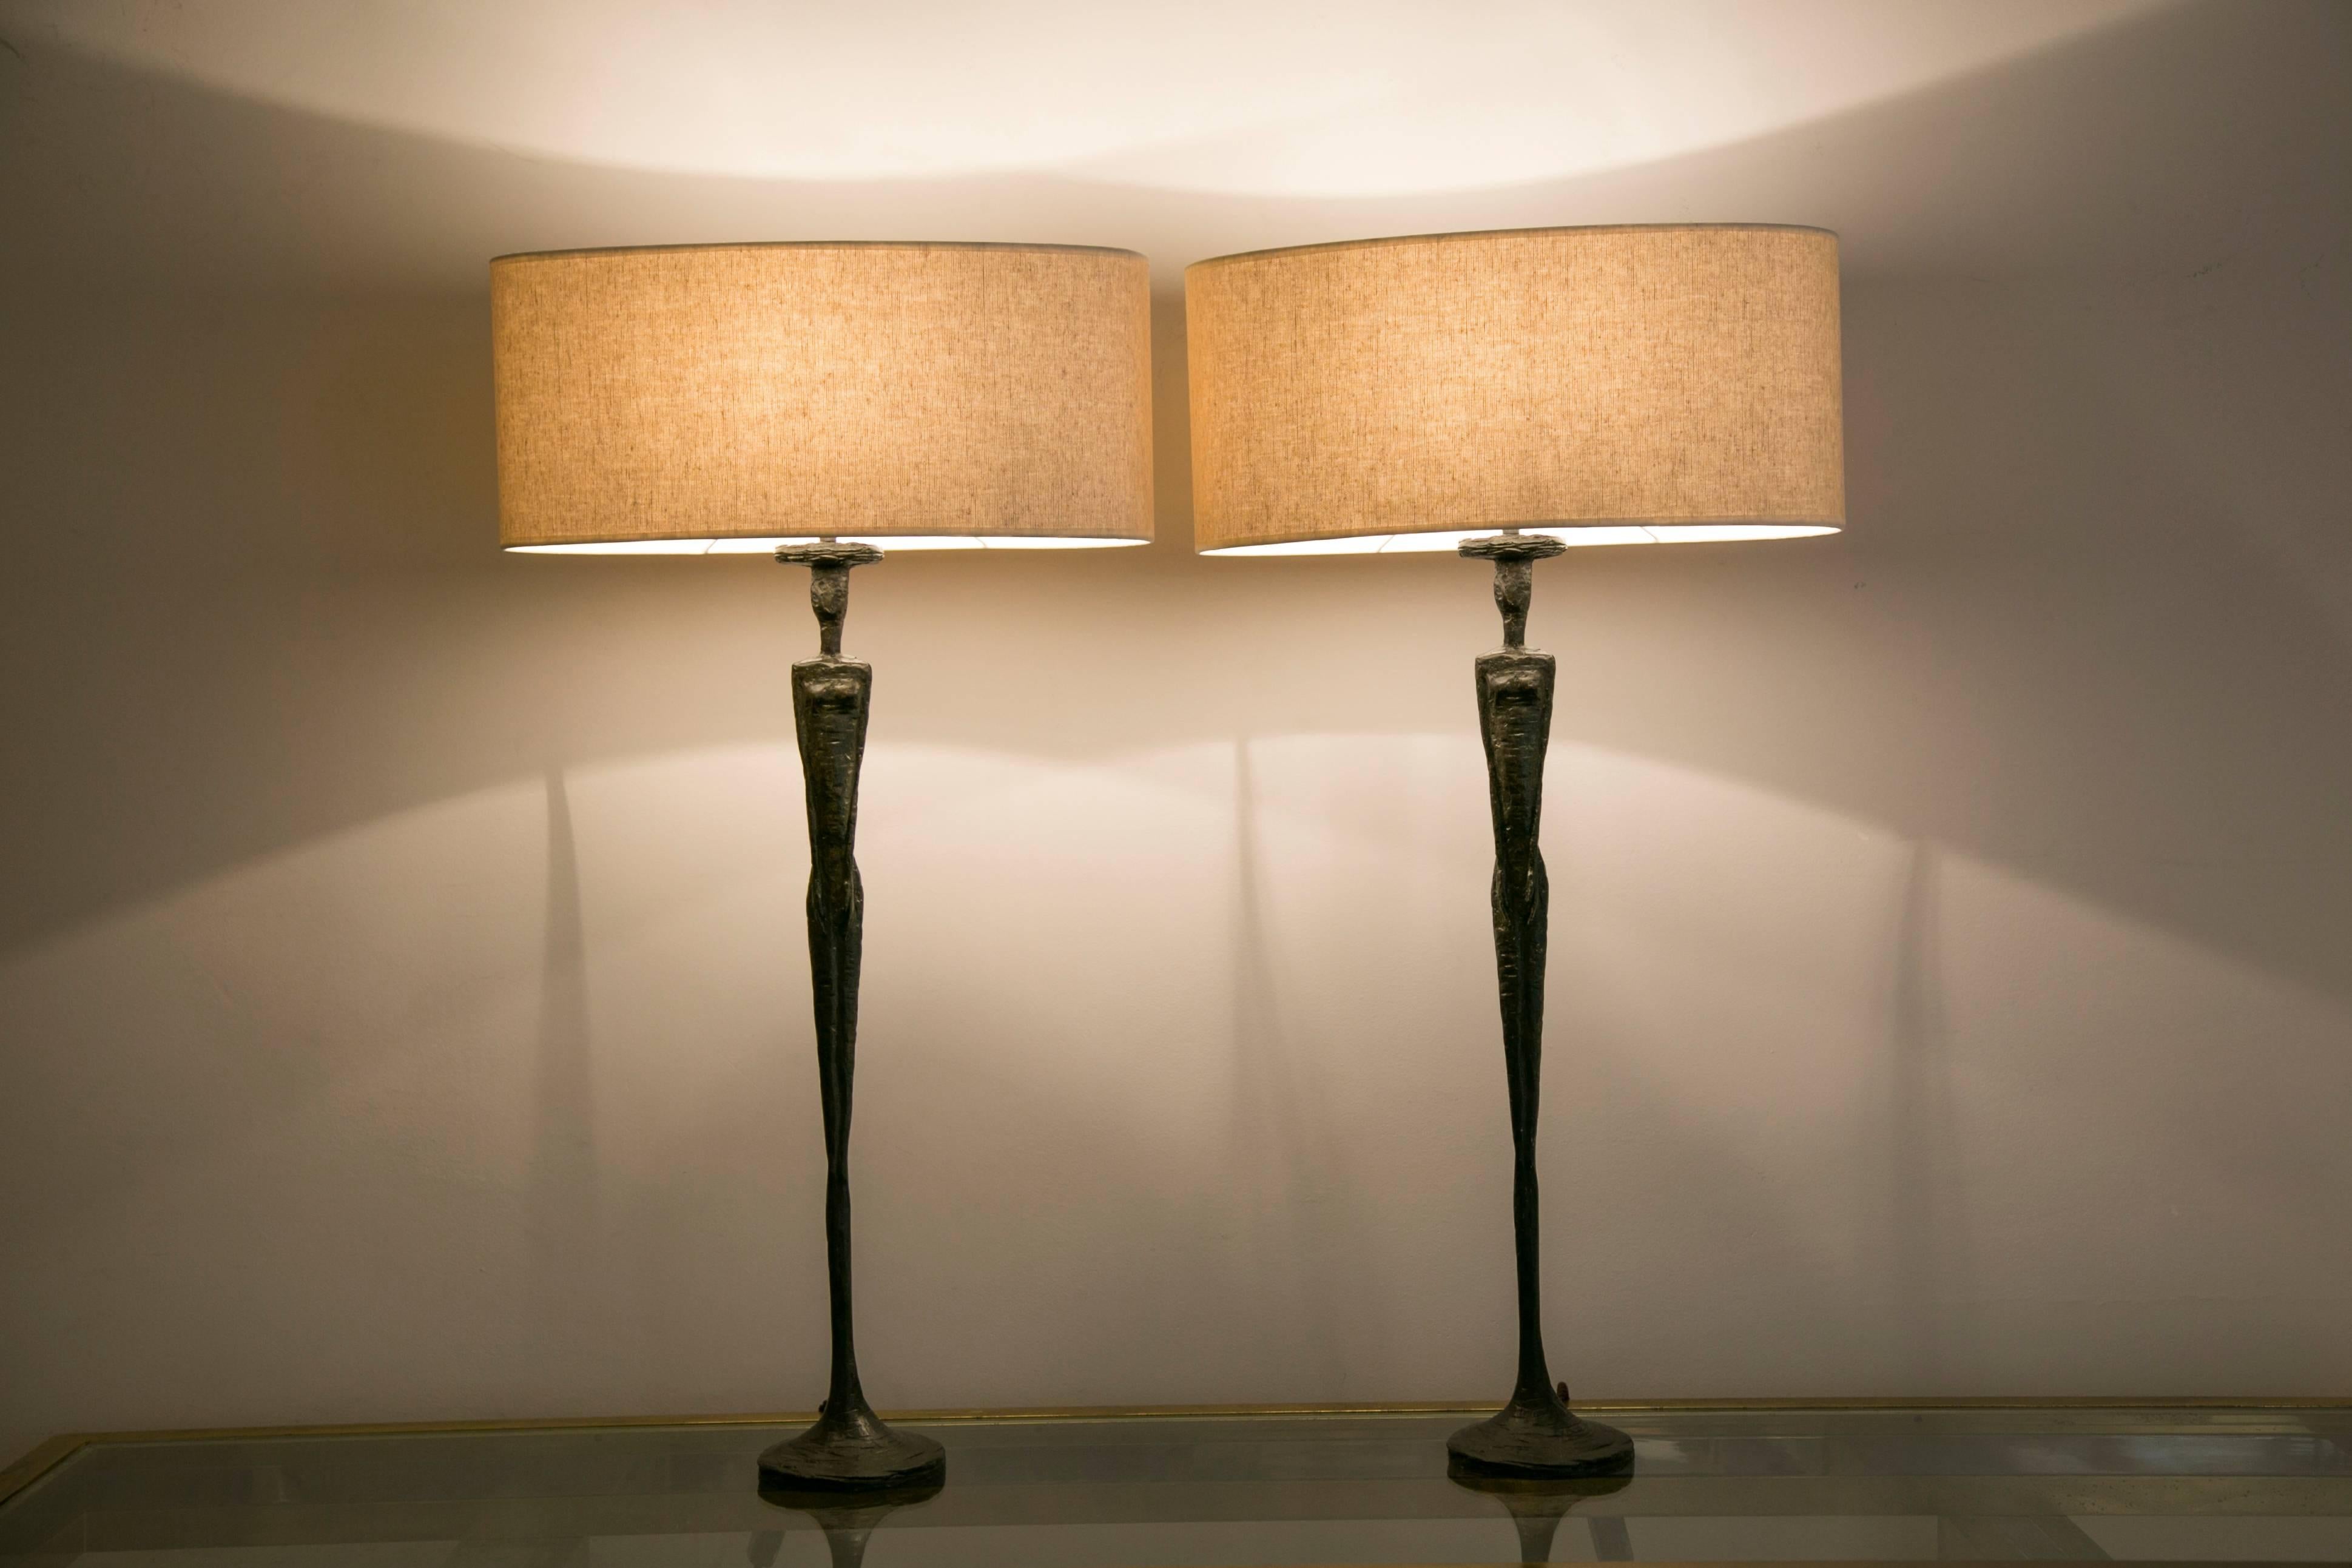 A pair of cast composite lamps with bronze patina, figuring tall human figures.
New shades
Marked: PR for Porta Romana
England, 1990s
Provenance: Hôtel Martinez, Cannes, France

Dimensions: 
Height (total) 85.5 cm / 33.46 in.
Height (figure)